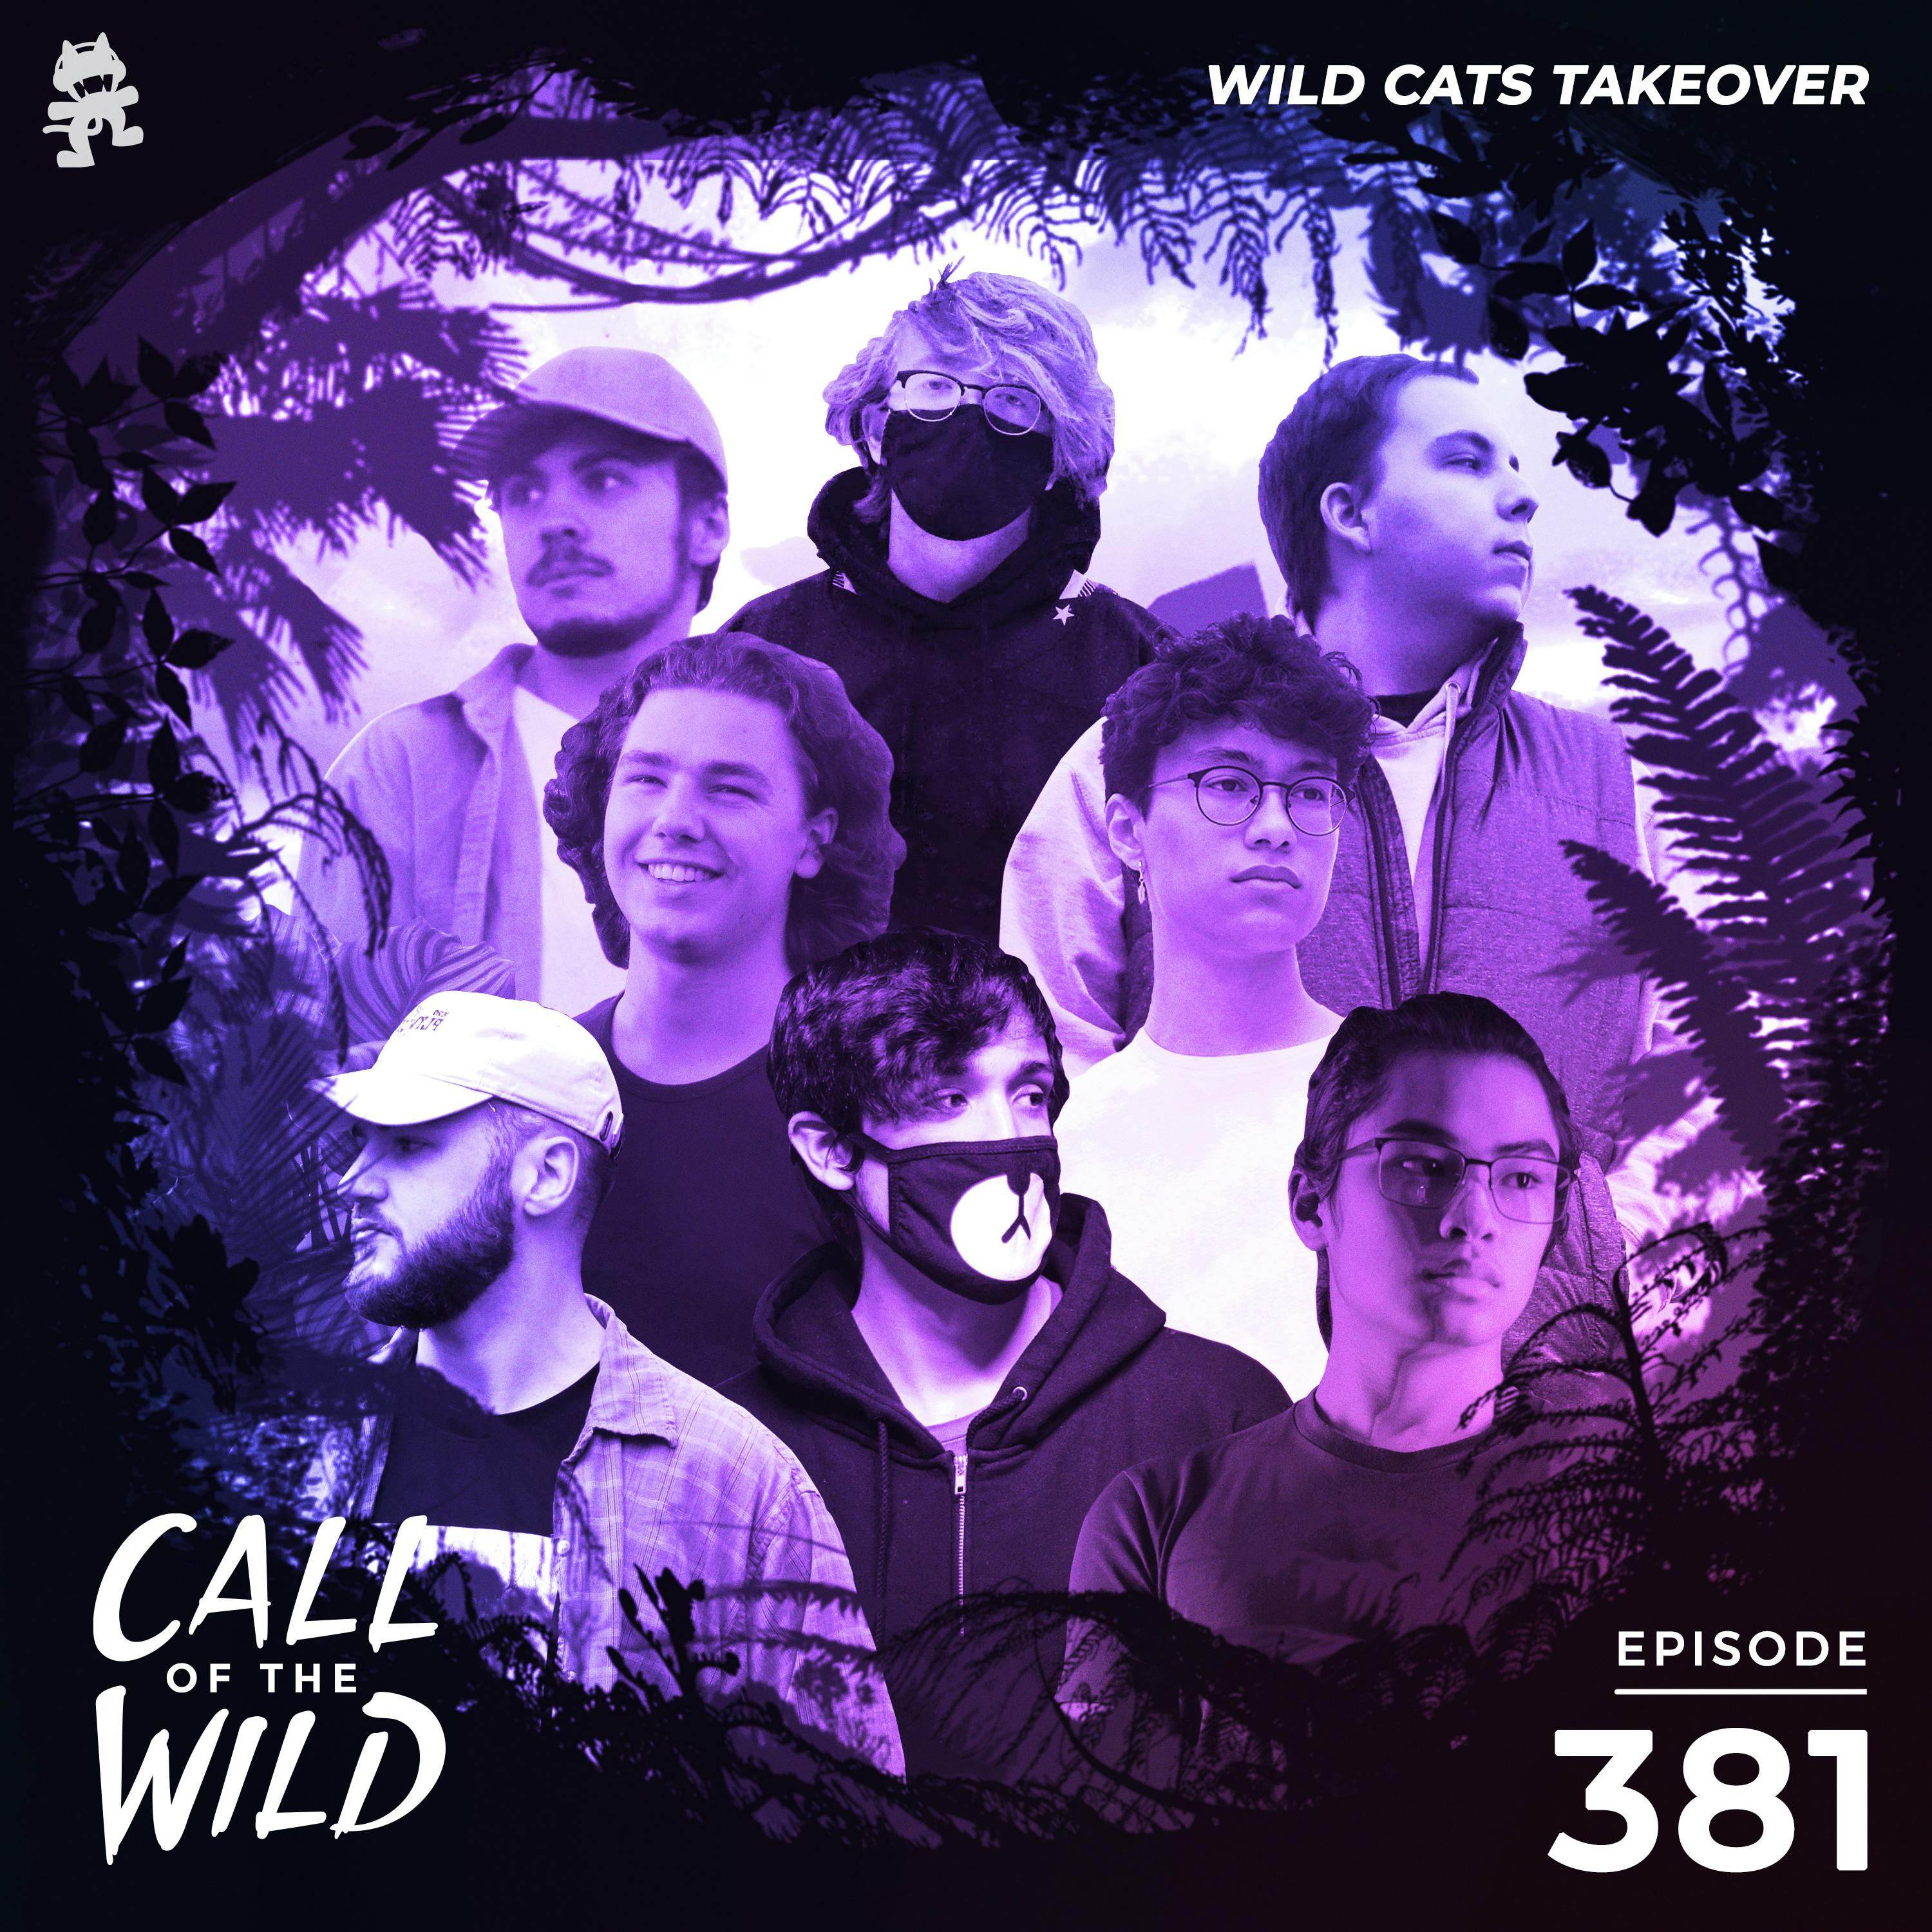 381 - Monstercat Call of the Wild (Wild Cats Takeover Pt. 2)